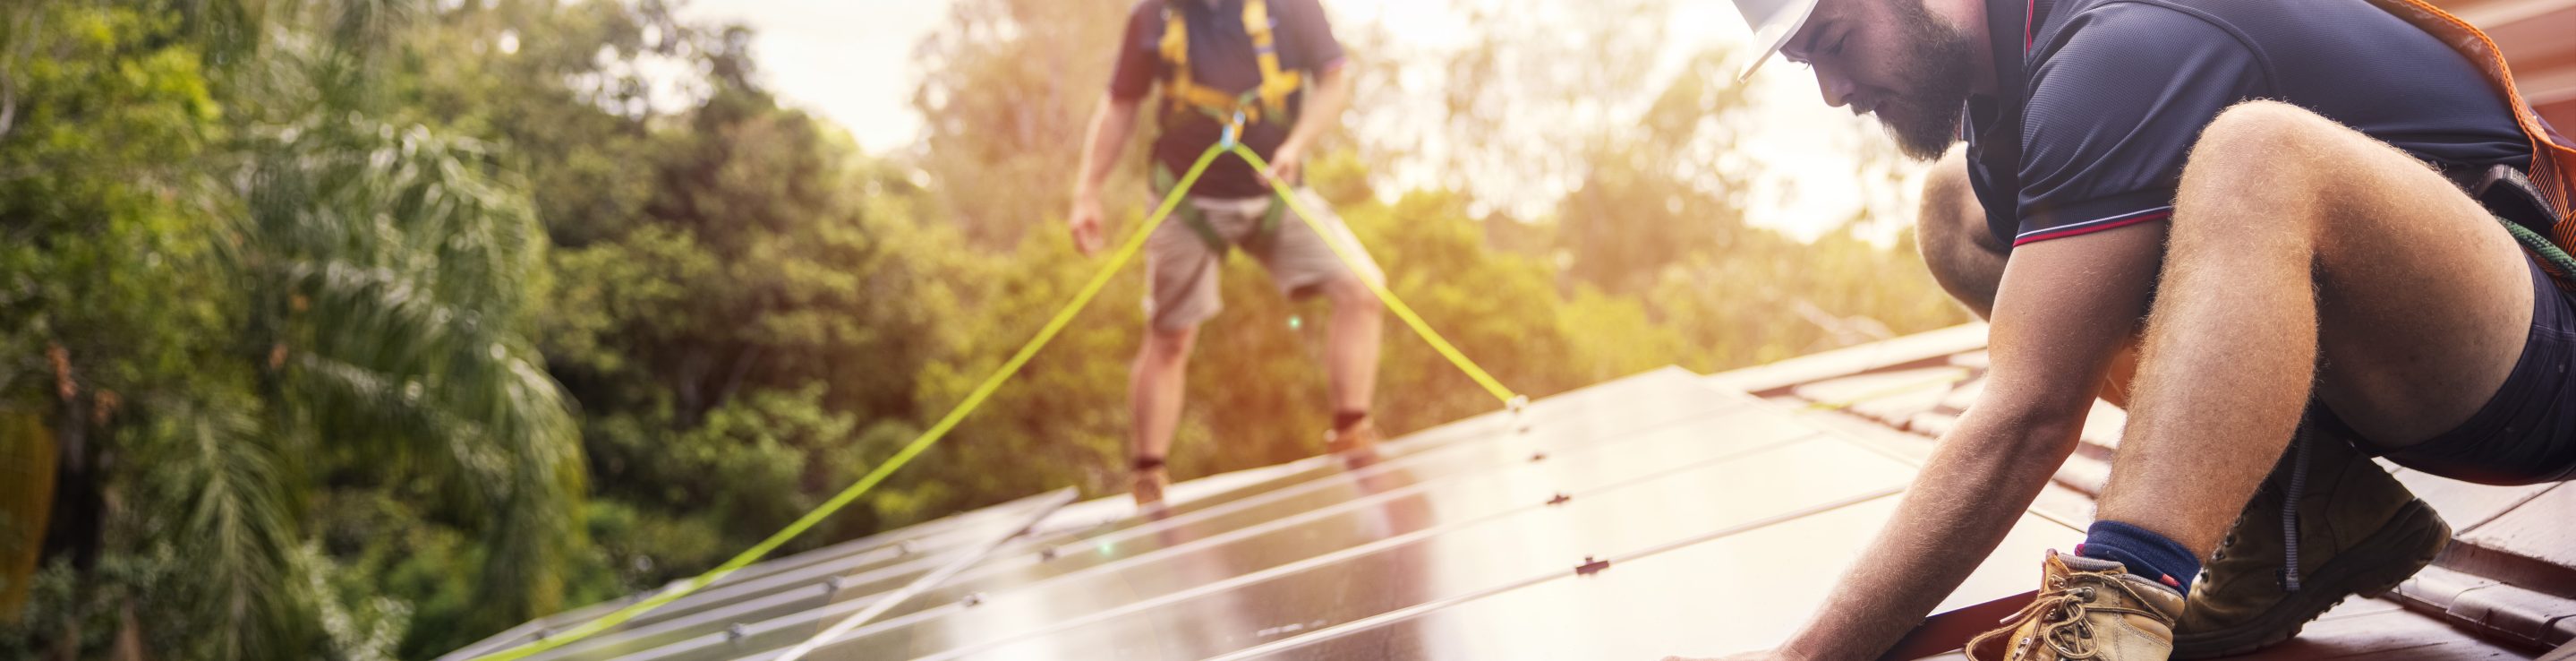 installing solar panels to set up a solar panel system